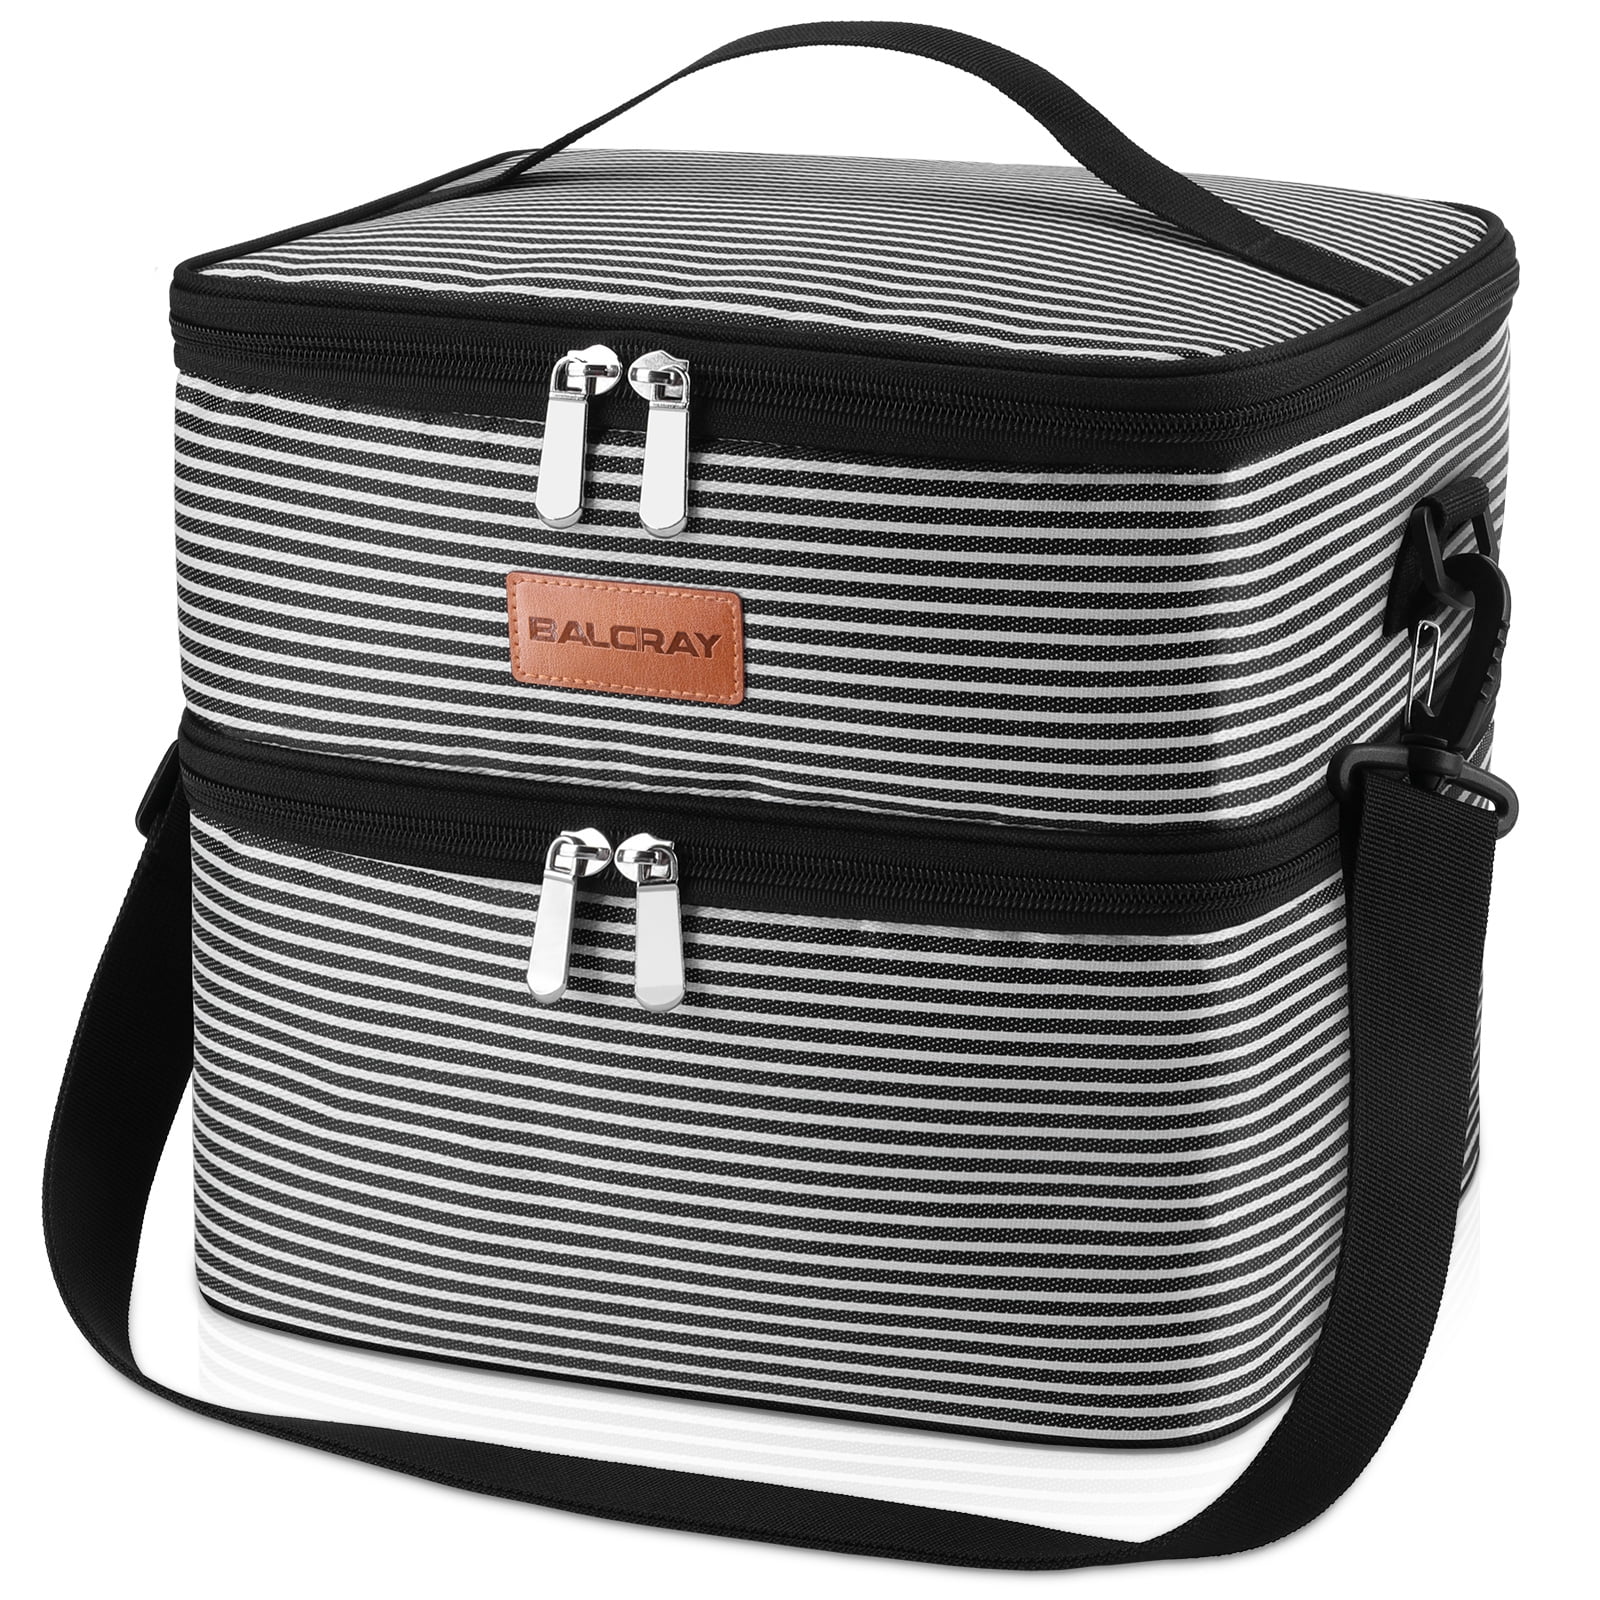 Thermal Travel Cooler Lunch Box Insulated Picnic Camping Hiking Portable Bag 